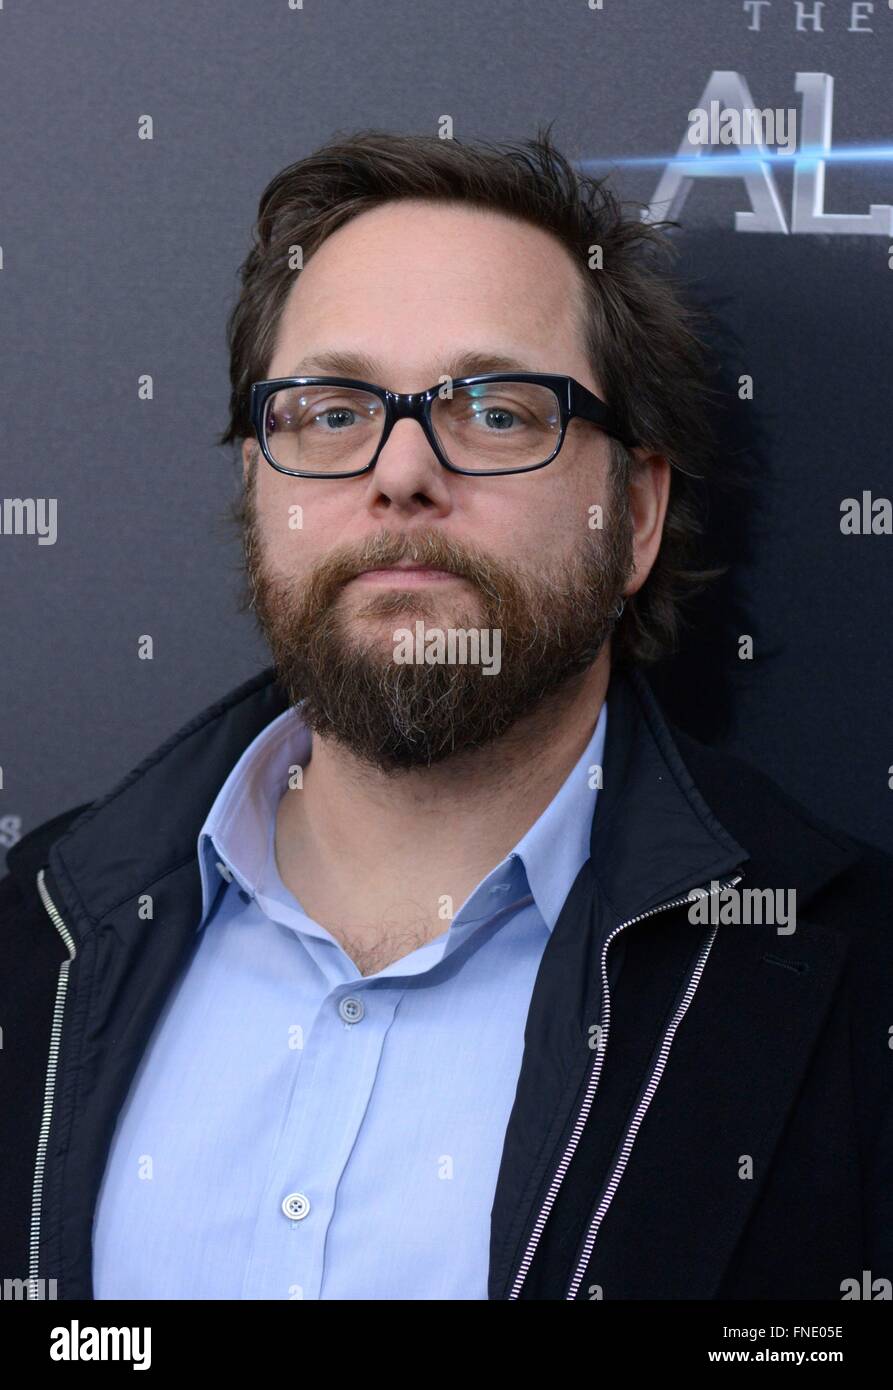 New York, NY, USA. 14th Mar, 2016. Robert Schwentke at arrivals for THE DIVERGENT SERIES: ALLEGIANT Premiere, AMC Loews Lincoln Square, New York, NY March 14, 2016. Credit:  Derek Storm/Everett Collection/Alamy Live News Stock Photo